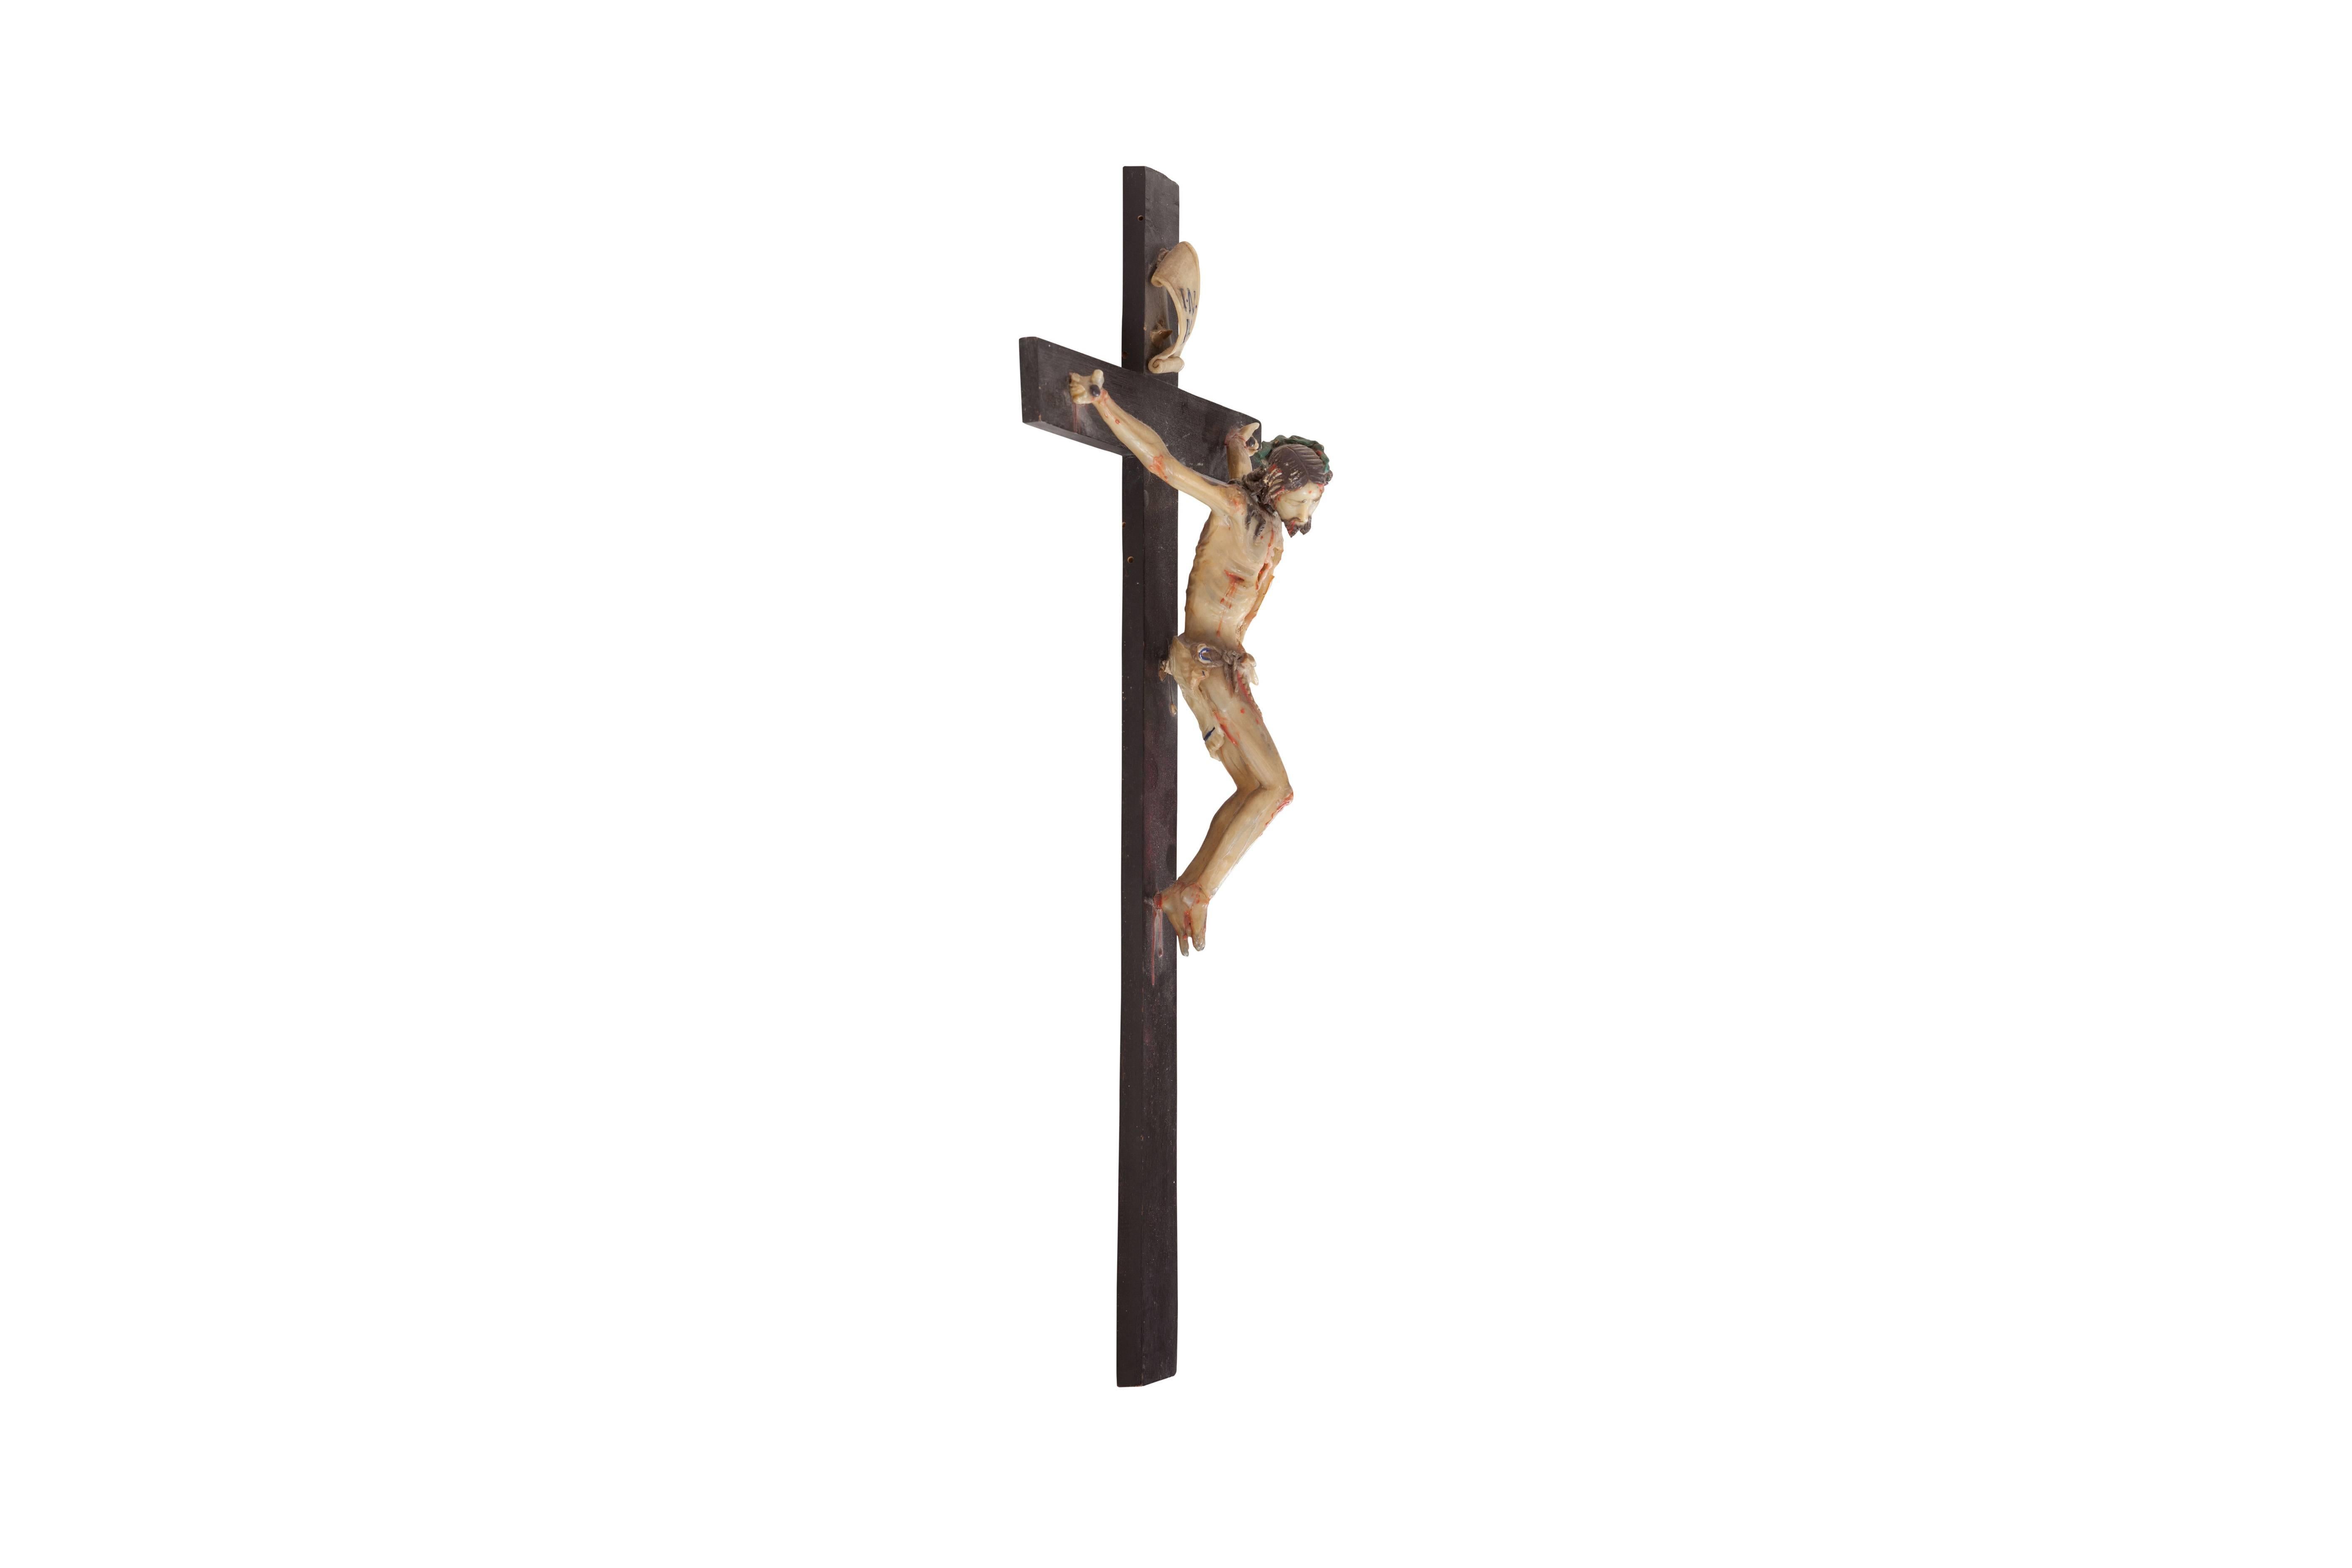 Modern translation of crucified and tortured Christ sculpture, Italy, 1960s

Above his head, there is a piece of parchment with I.N.R.I written on it, which in Latin means: Iesus Nazarenus, Rex Iudaeorum (Jesus of Nazareth, king of the